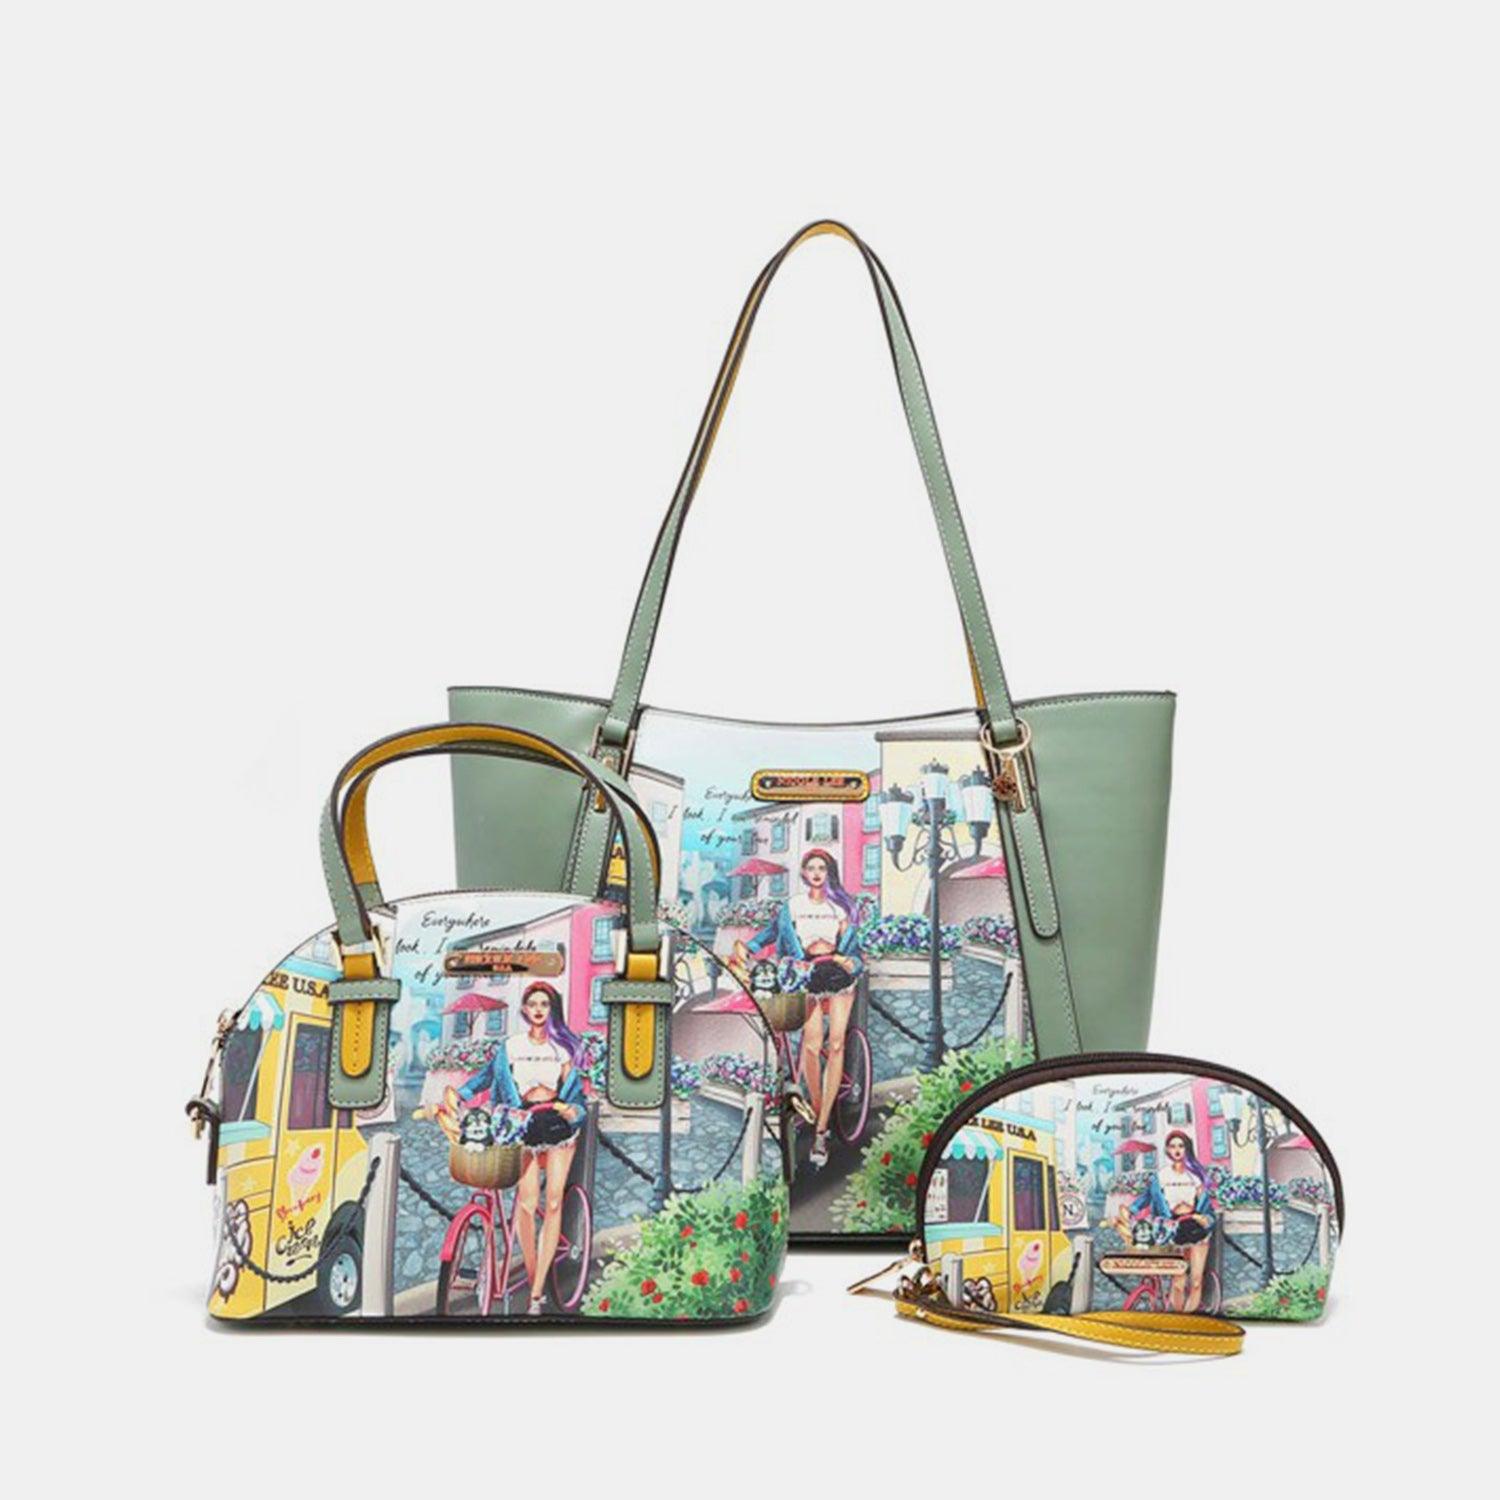 two purses and a handbag with a picture of a woman